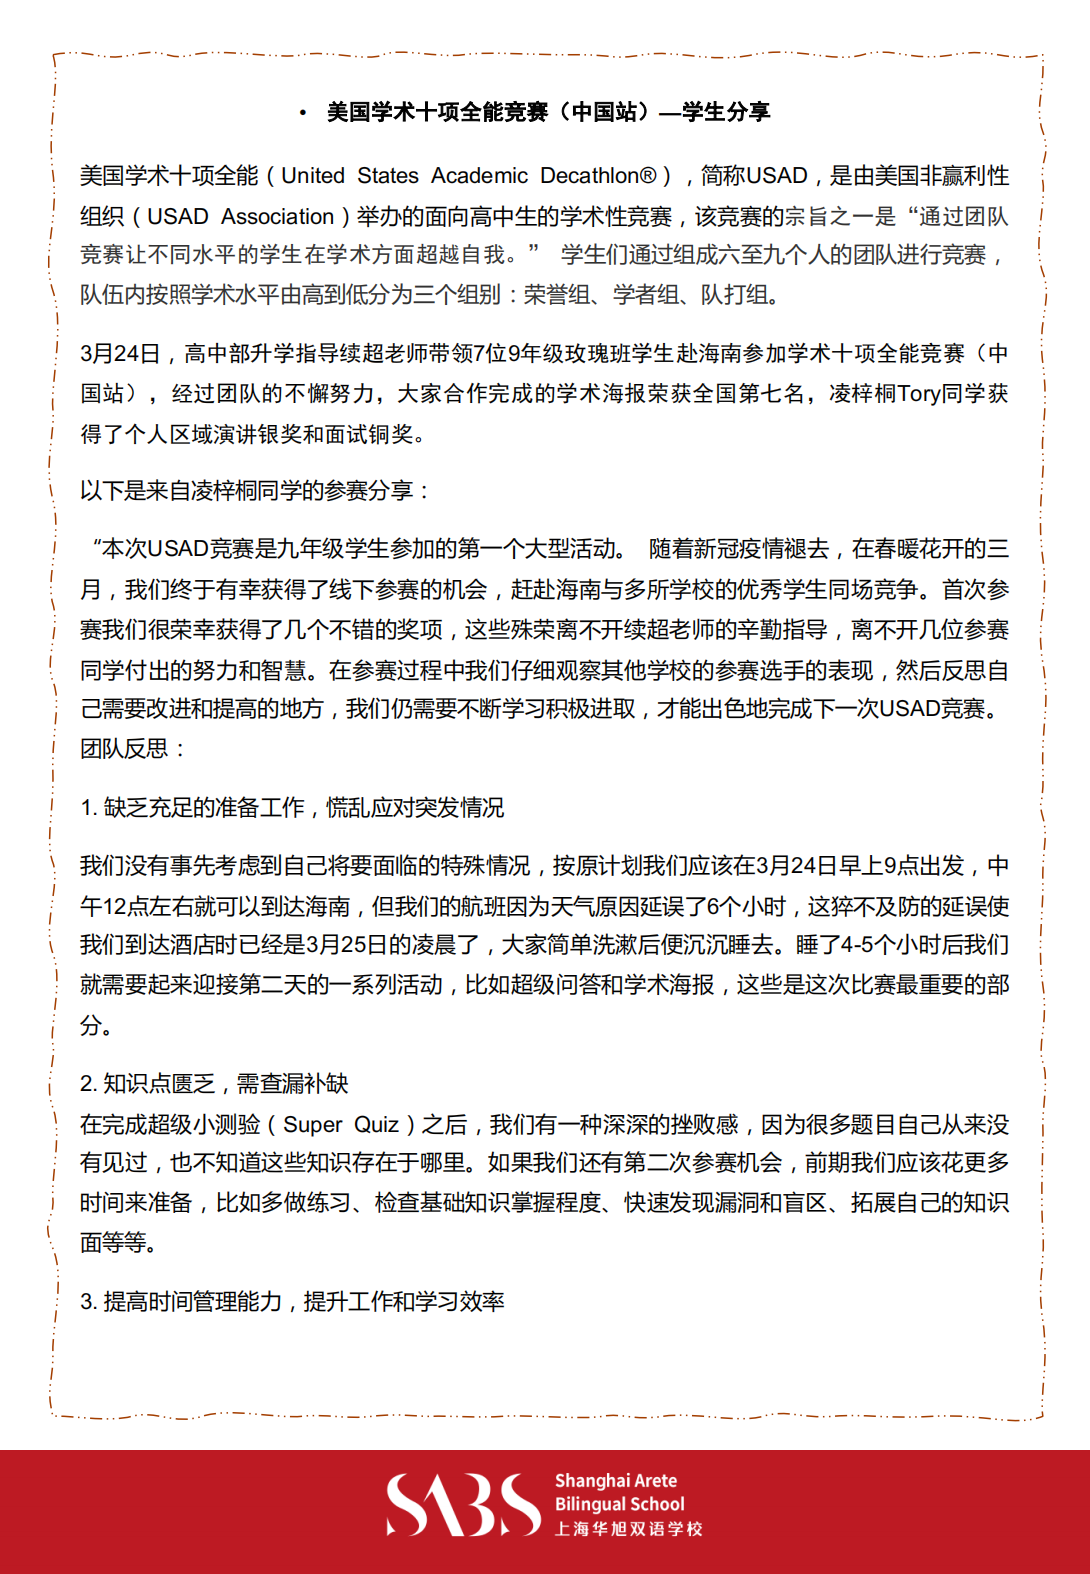 HS 4th Issue Newsletter pptx（Chinese）_17.png